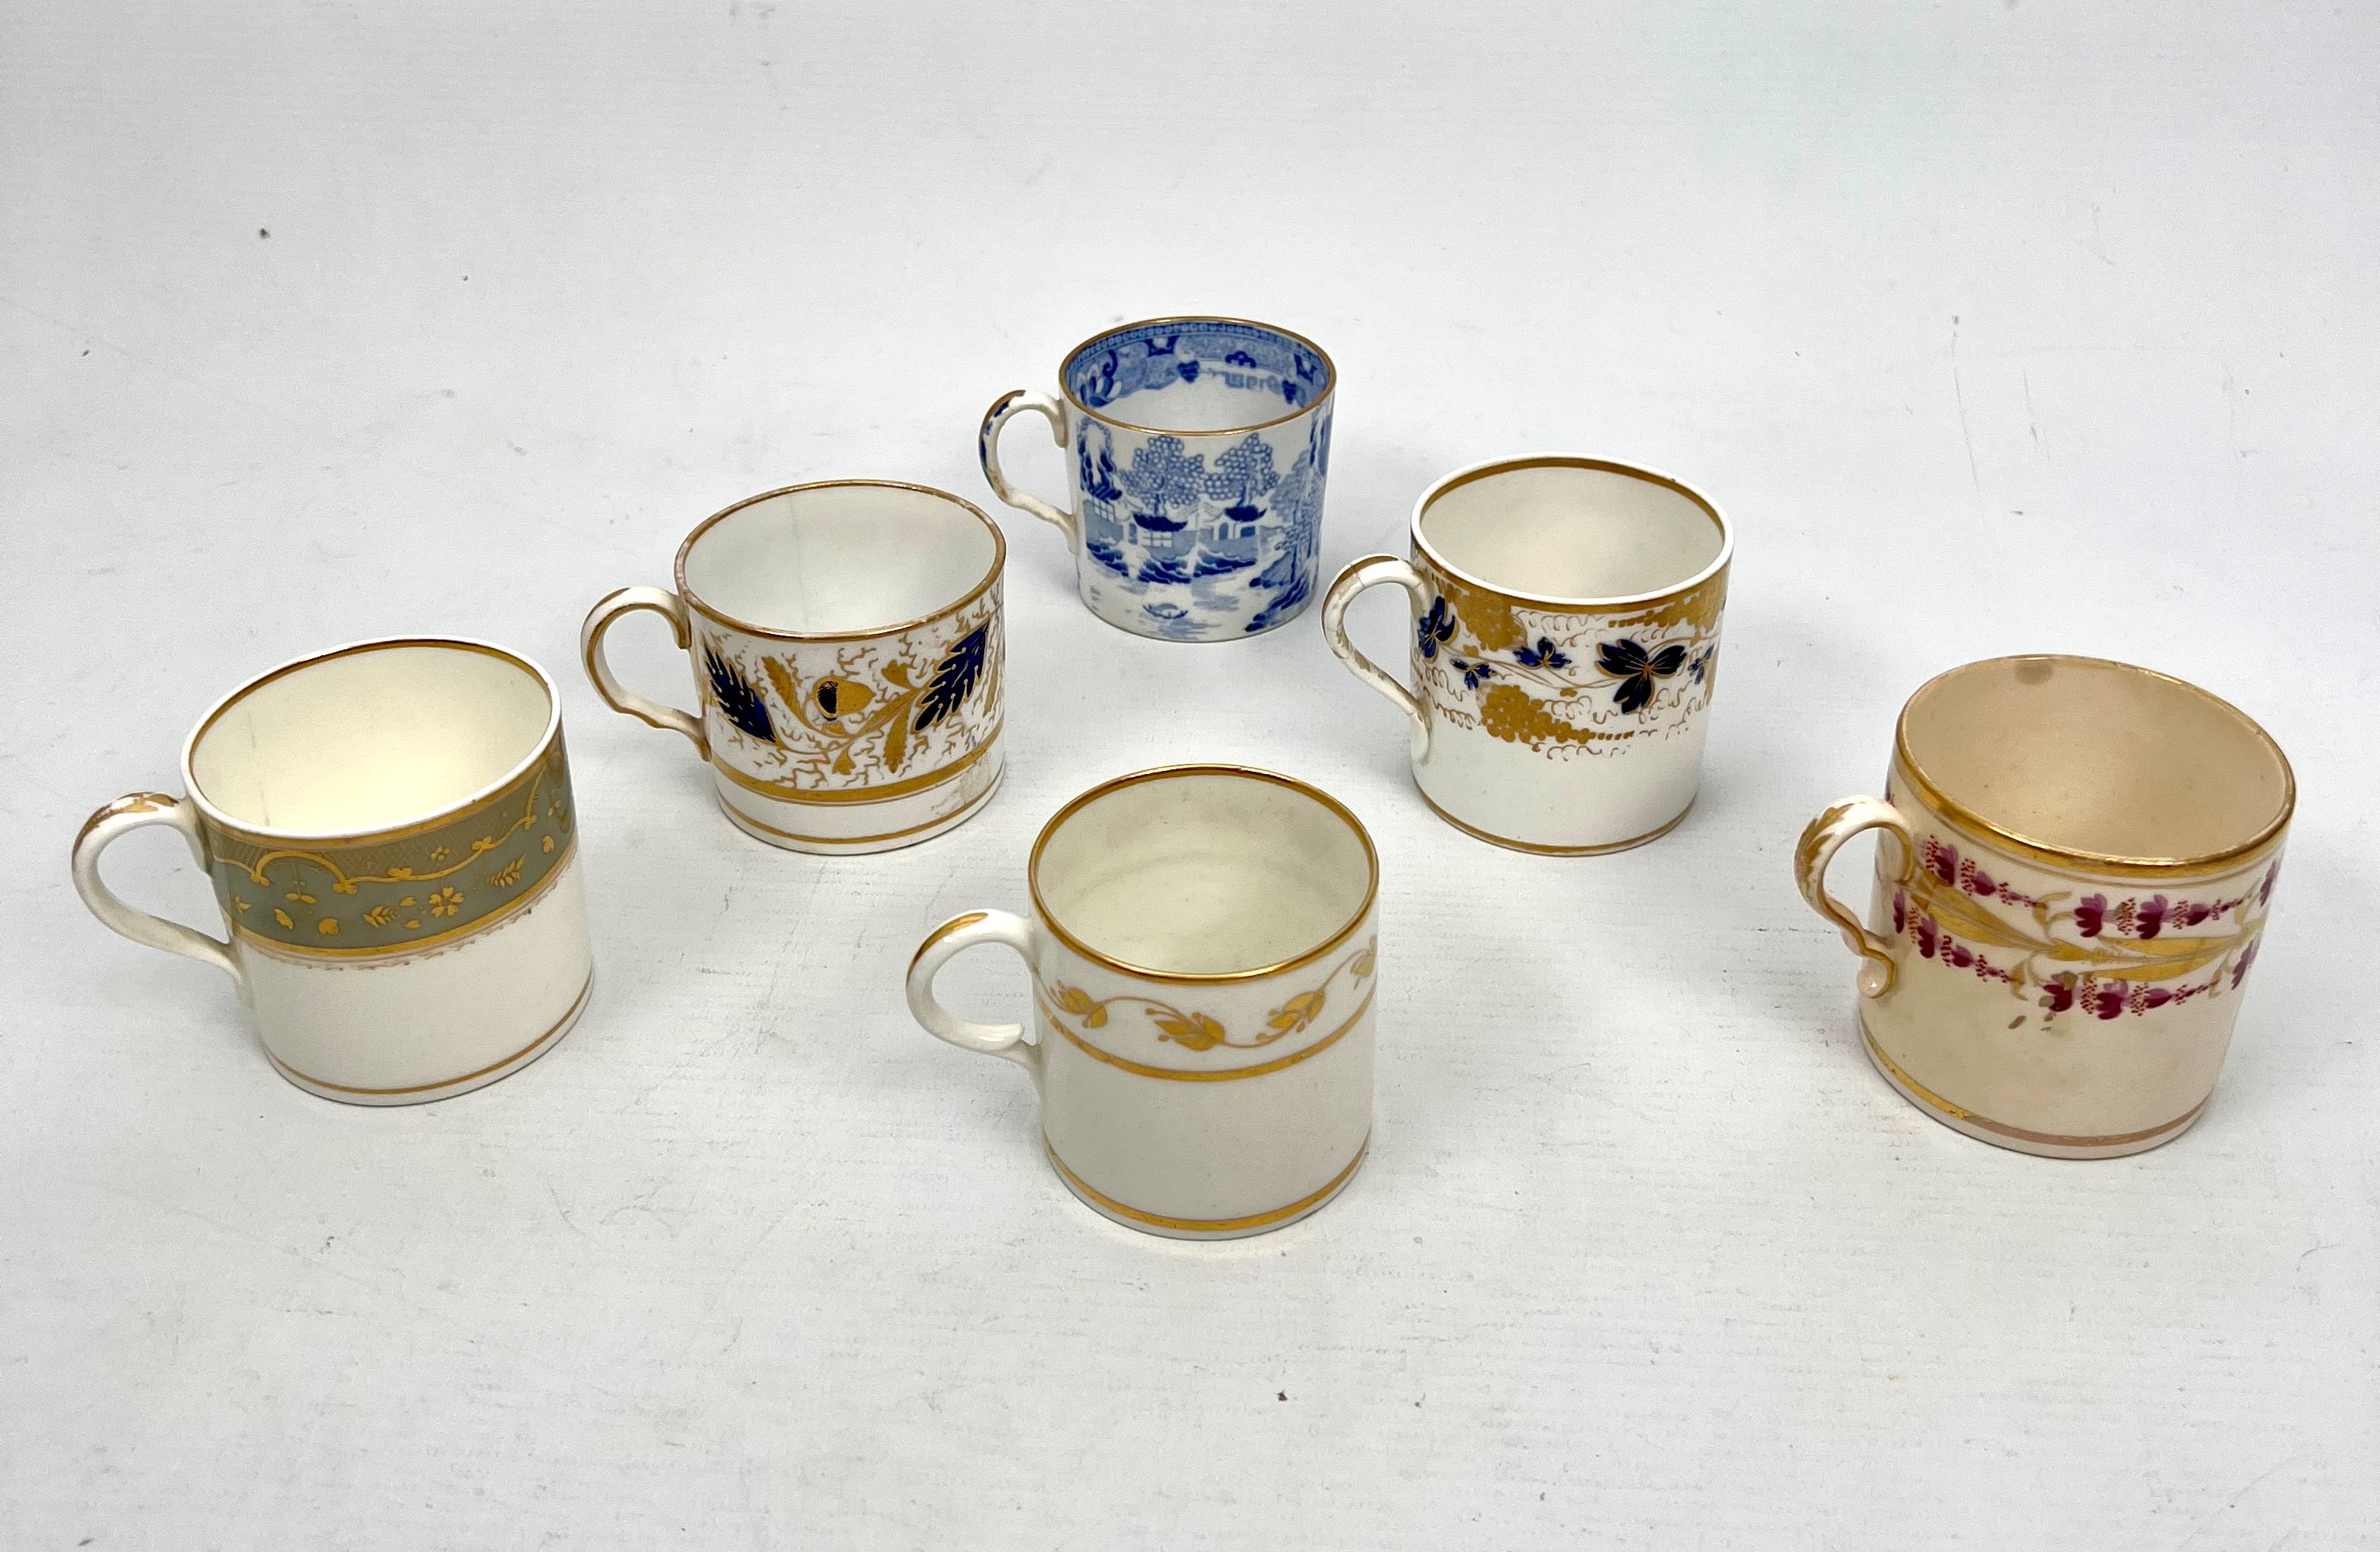 Six late 18th and 19th century English porcelain coffee cans - including three examples by Derby and